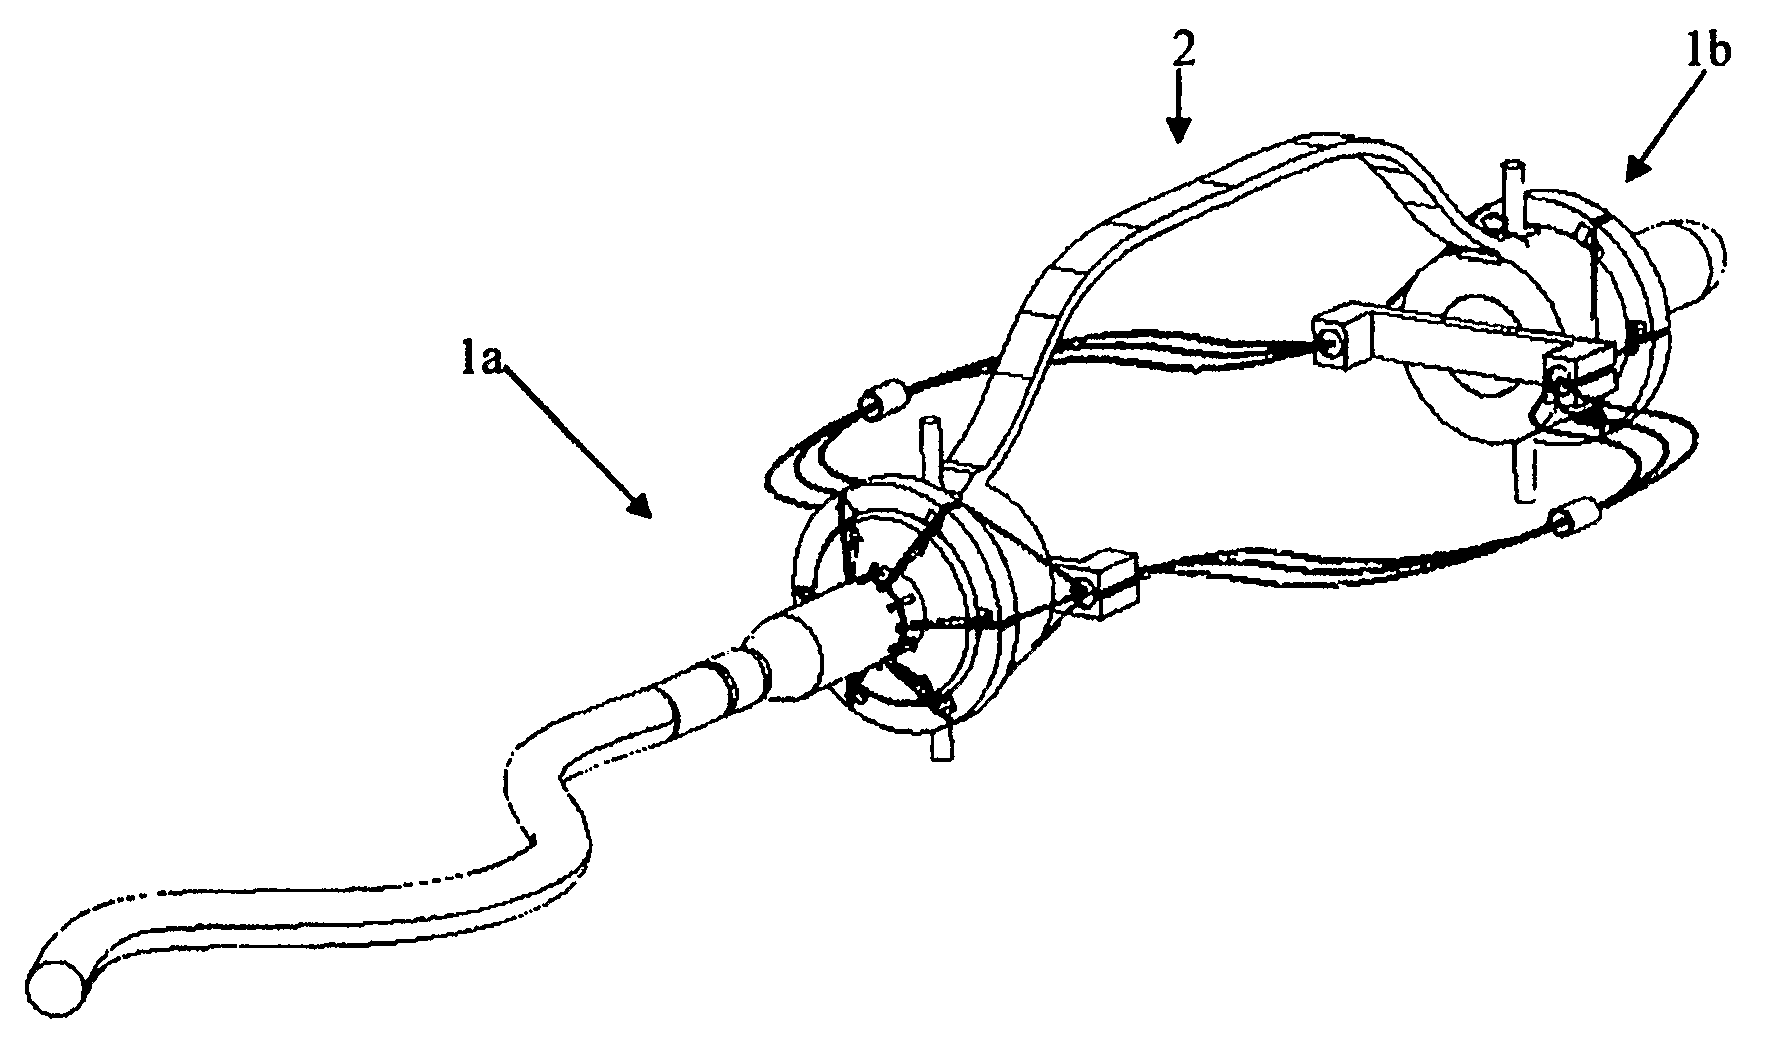 Assisted Apparatus for Anastomosis and Method Thereby of Reconnecting the Urethra to the Bladder After Removal of the Prostate During a Prostatectomy